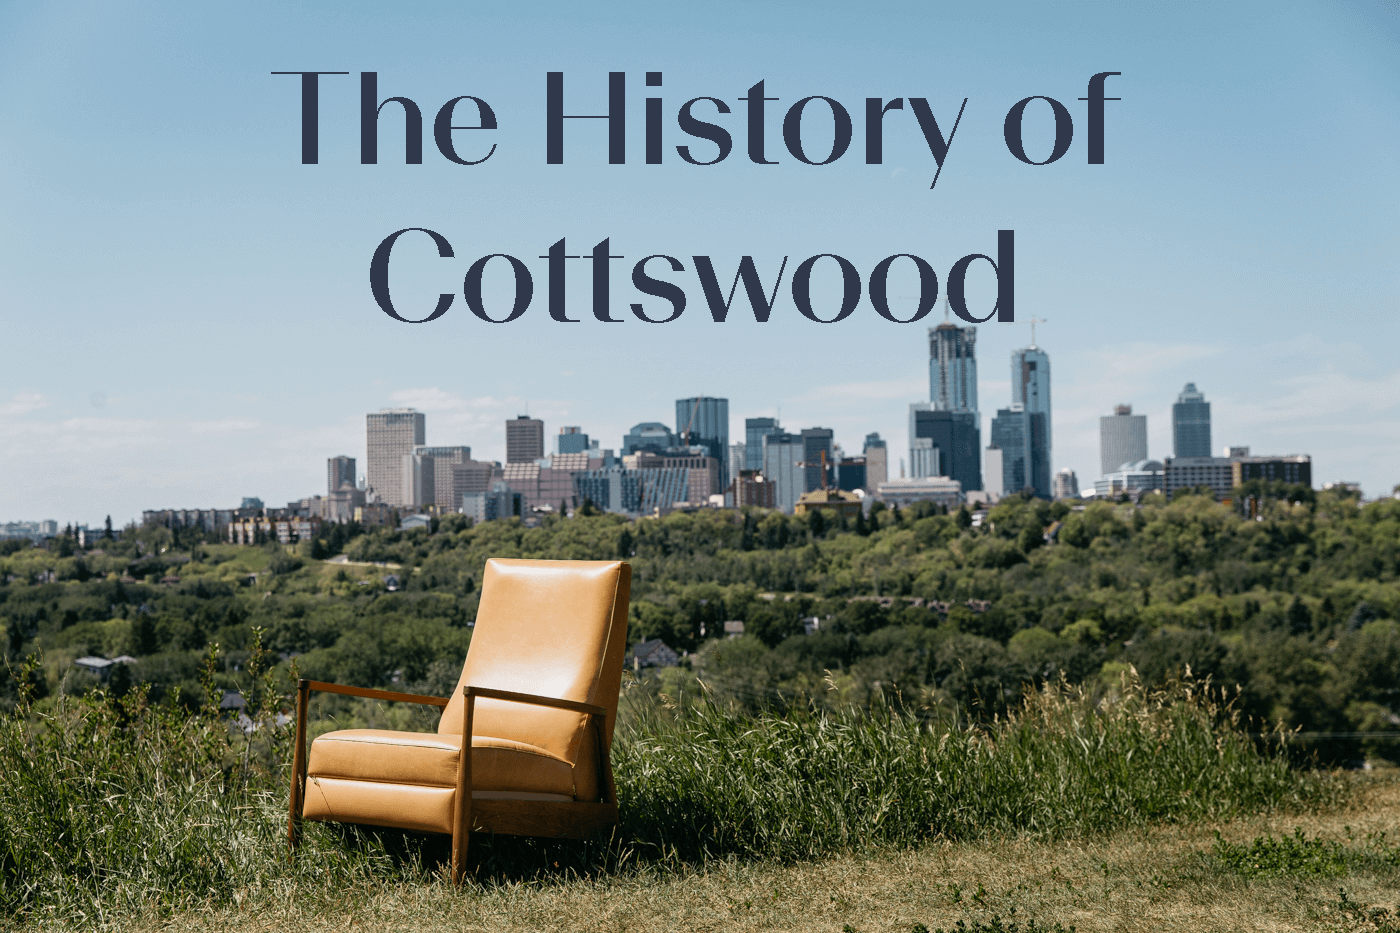 The History of Cottswood